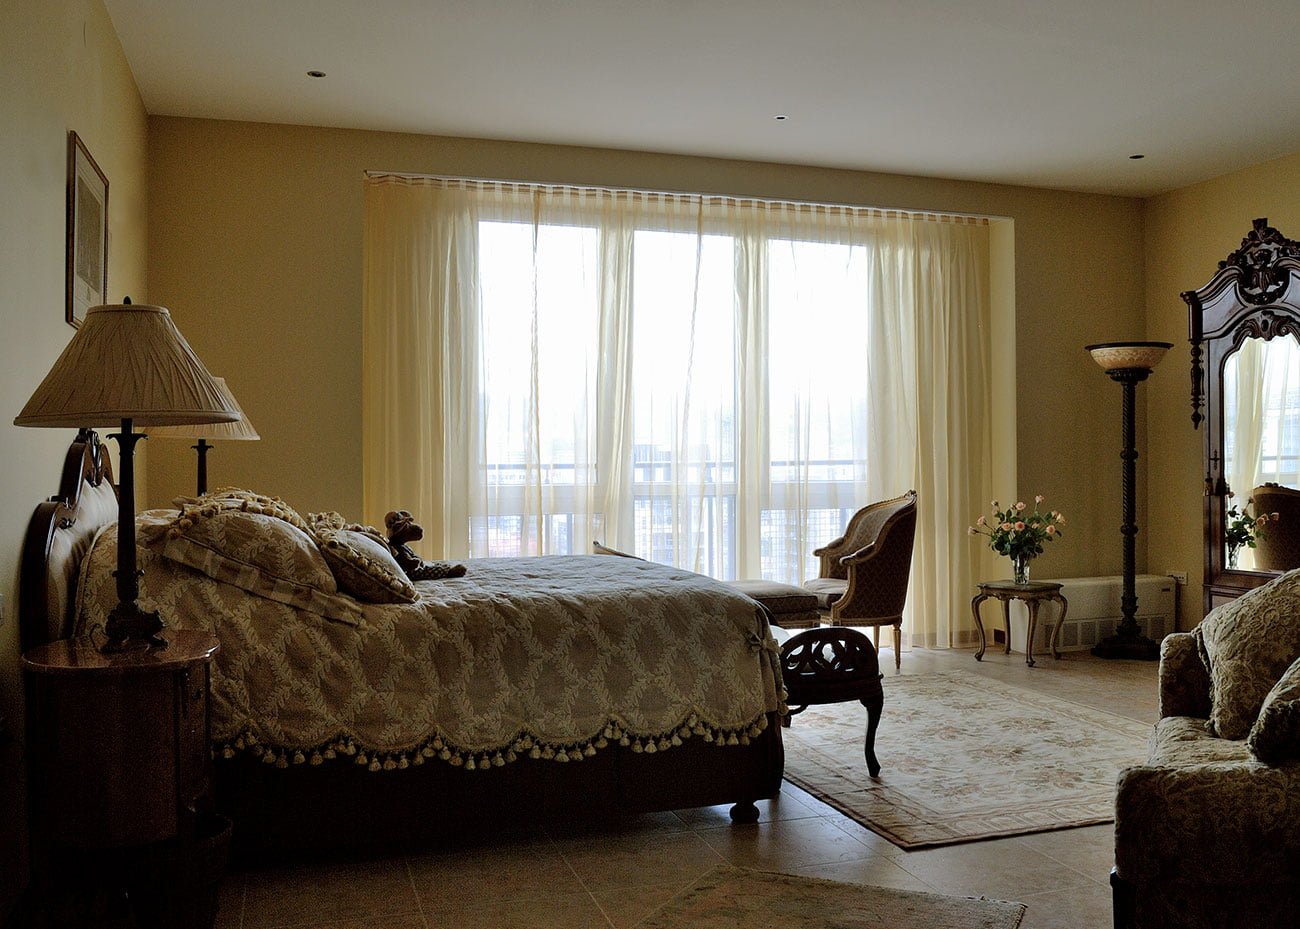 photo of the interior of the master bedroom on the second floor with antique cabinets and lamps